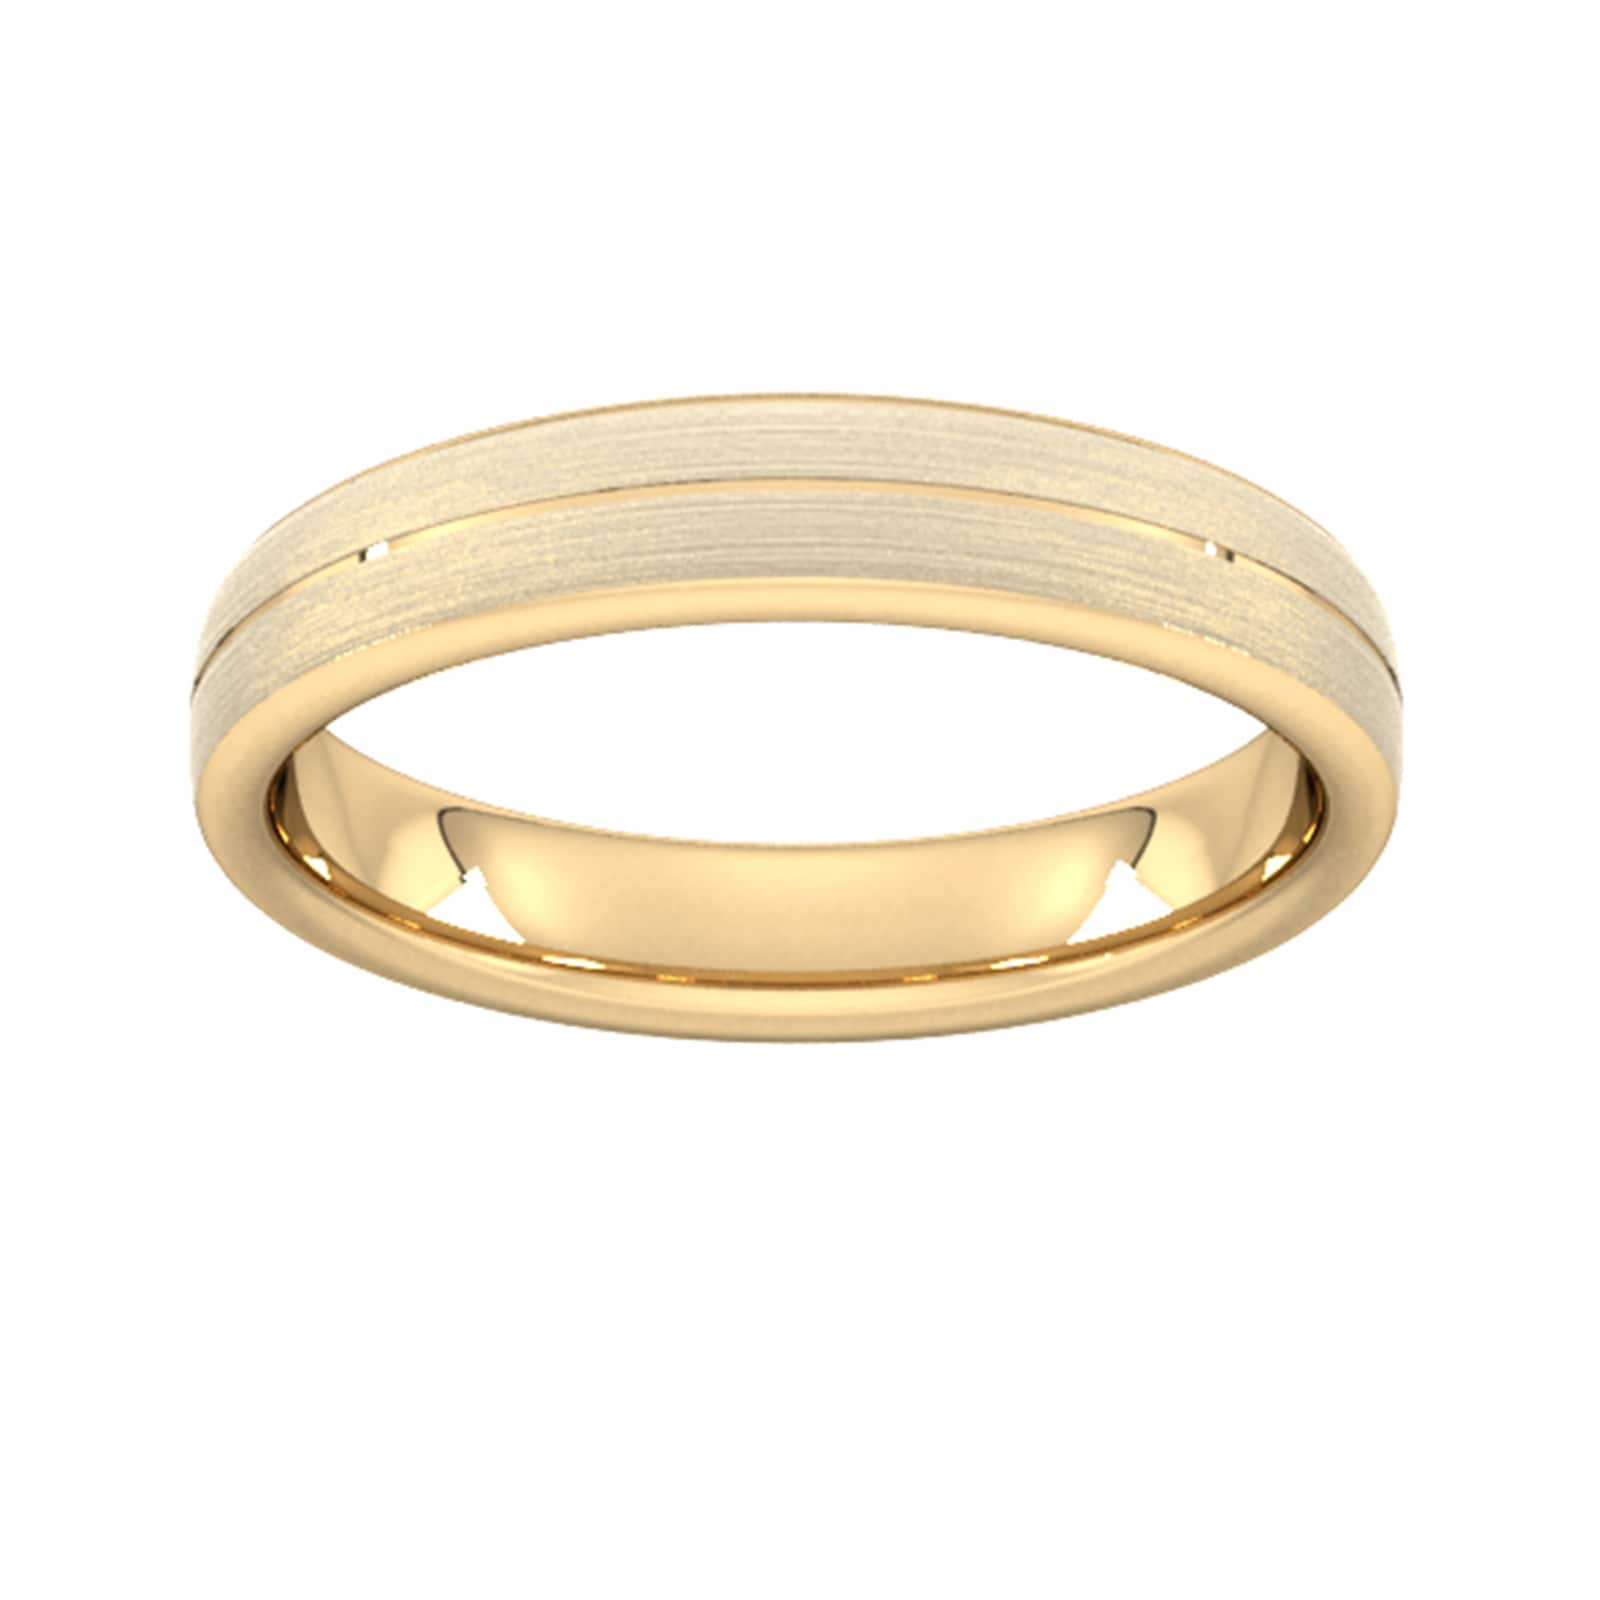 4mm Slight Court Extra Heavy Centre Groove With Chamfered Edge Wedding Ring In 18 Carat Yellow Gold - Ring Size Z